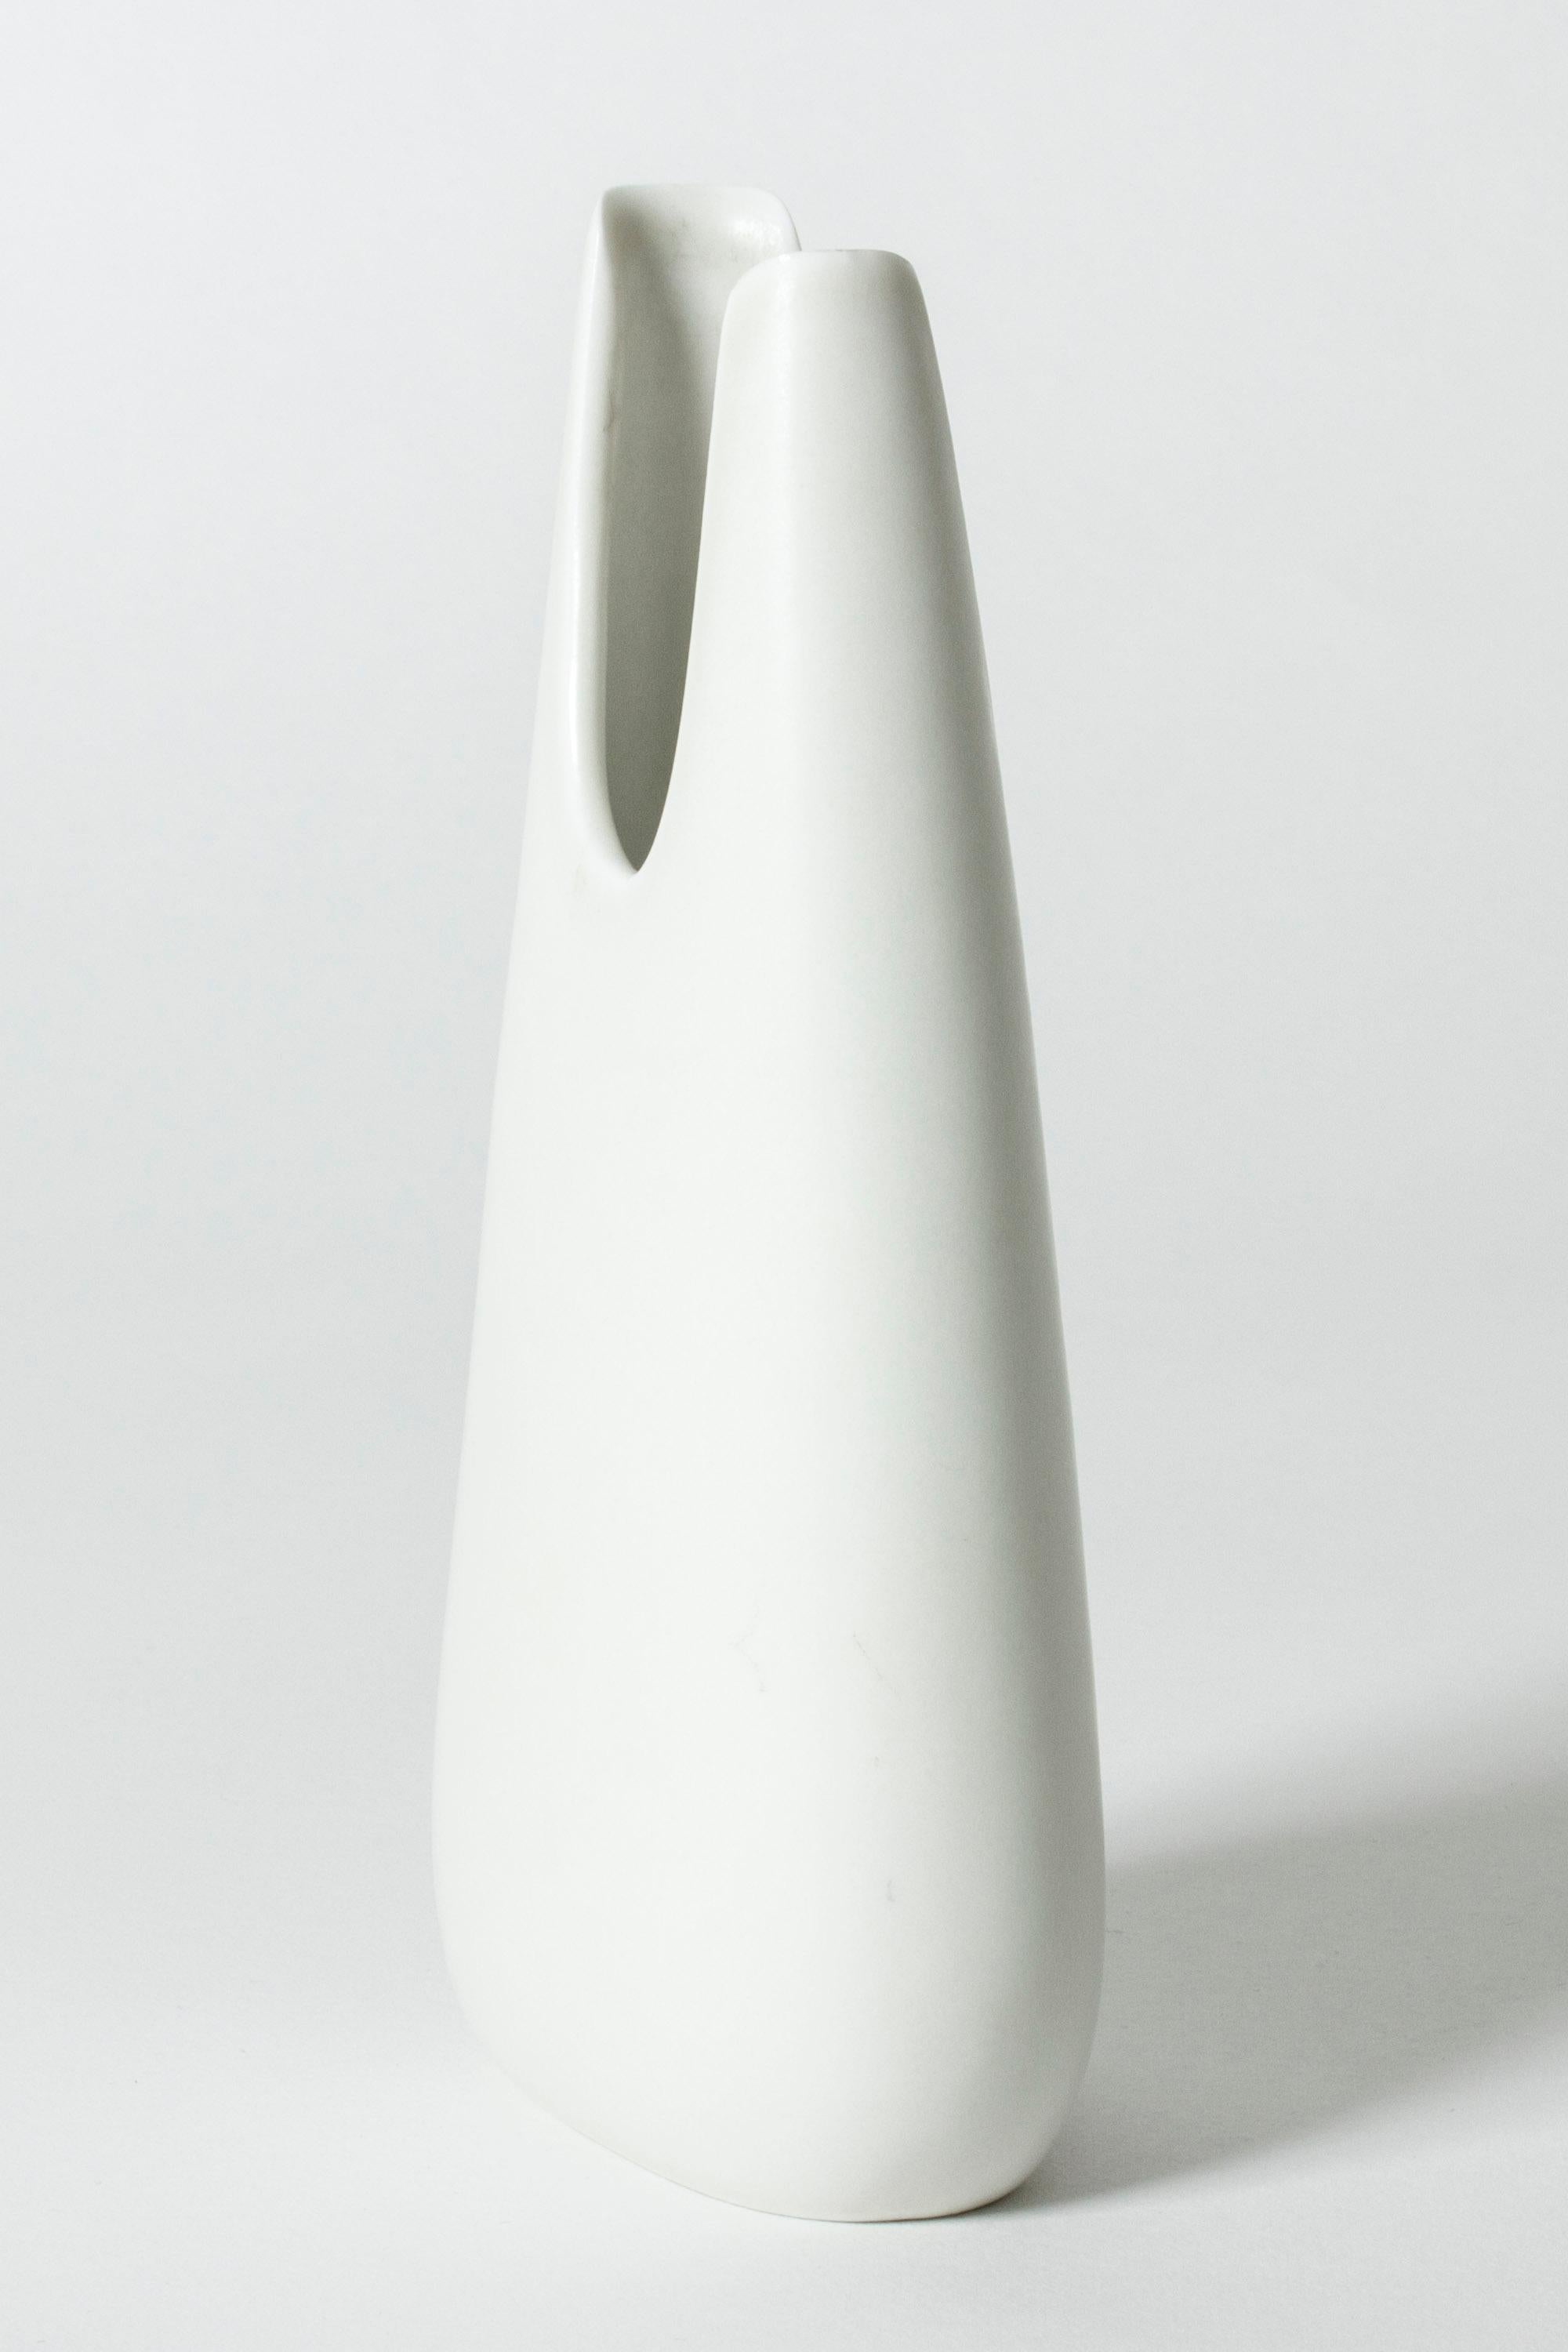 Cool “Caolina” stoneware vase by Gunnar Nylund, in a smooth, asymmetric form. Clean design with crisp white glaze.

Gunnar Nylund was one of the most influential ceramicists and designers of the Swedish mid-century period. He was Rörstrand’s